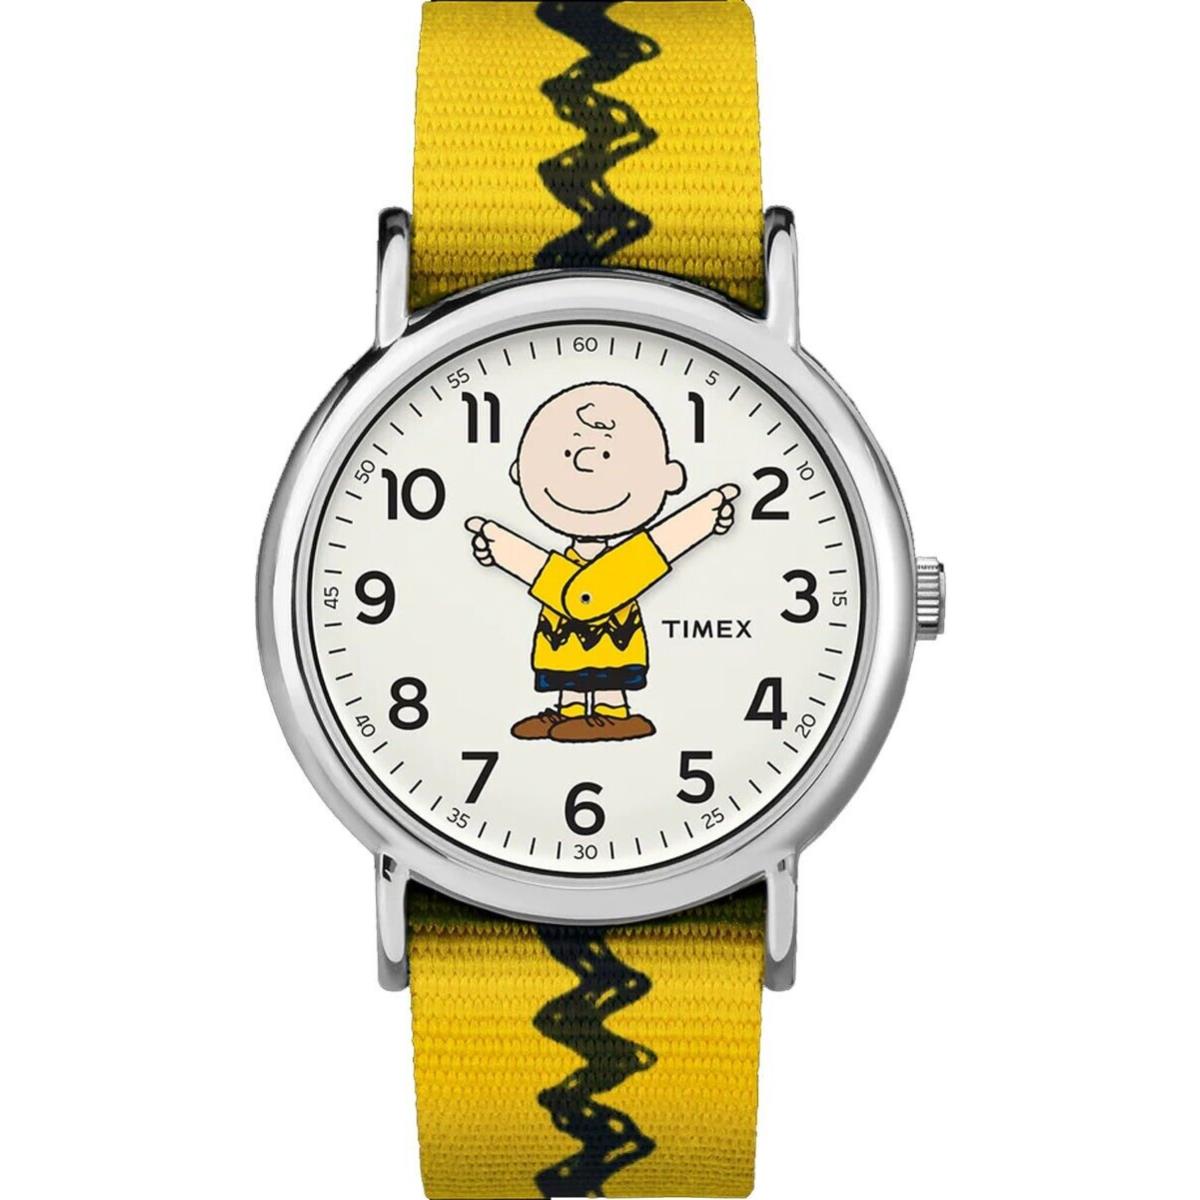 Timex TW2R41100 x Peanuts - Charlie Brown 38mm Fabric Strap Watch - Dial: Off-White, Band: Yellow, Bezel: Silver